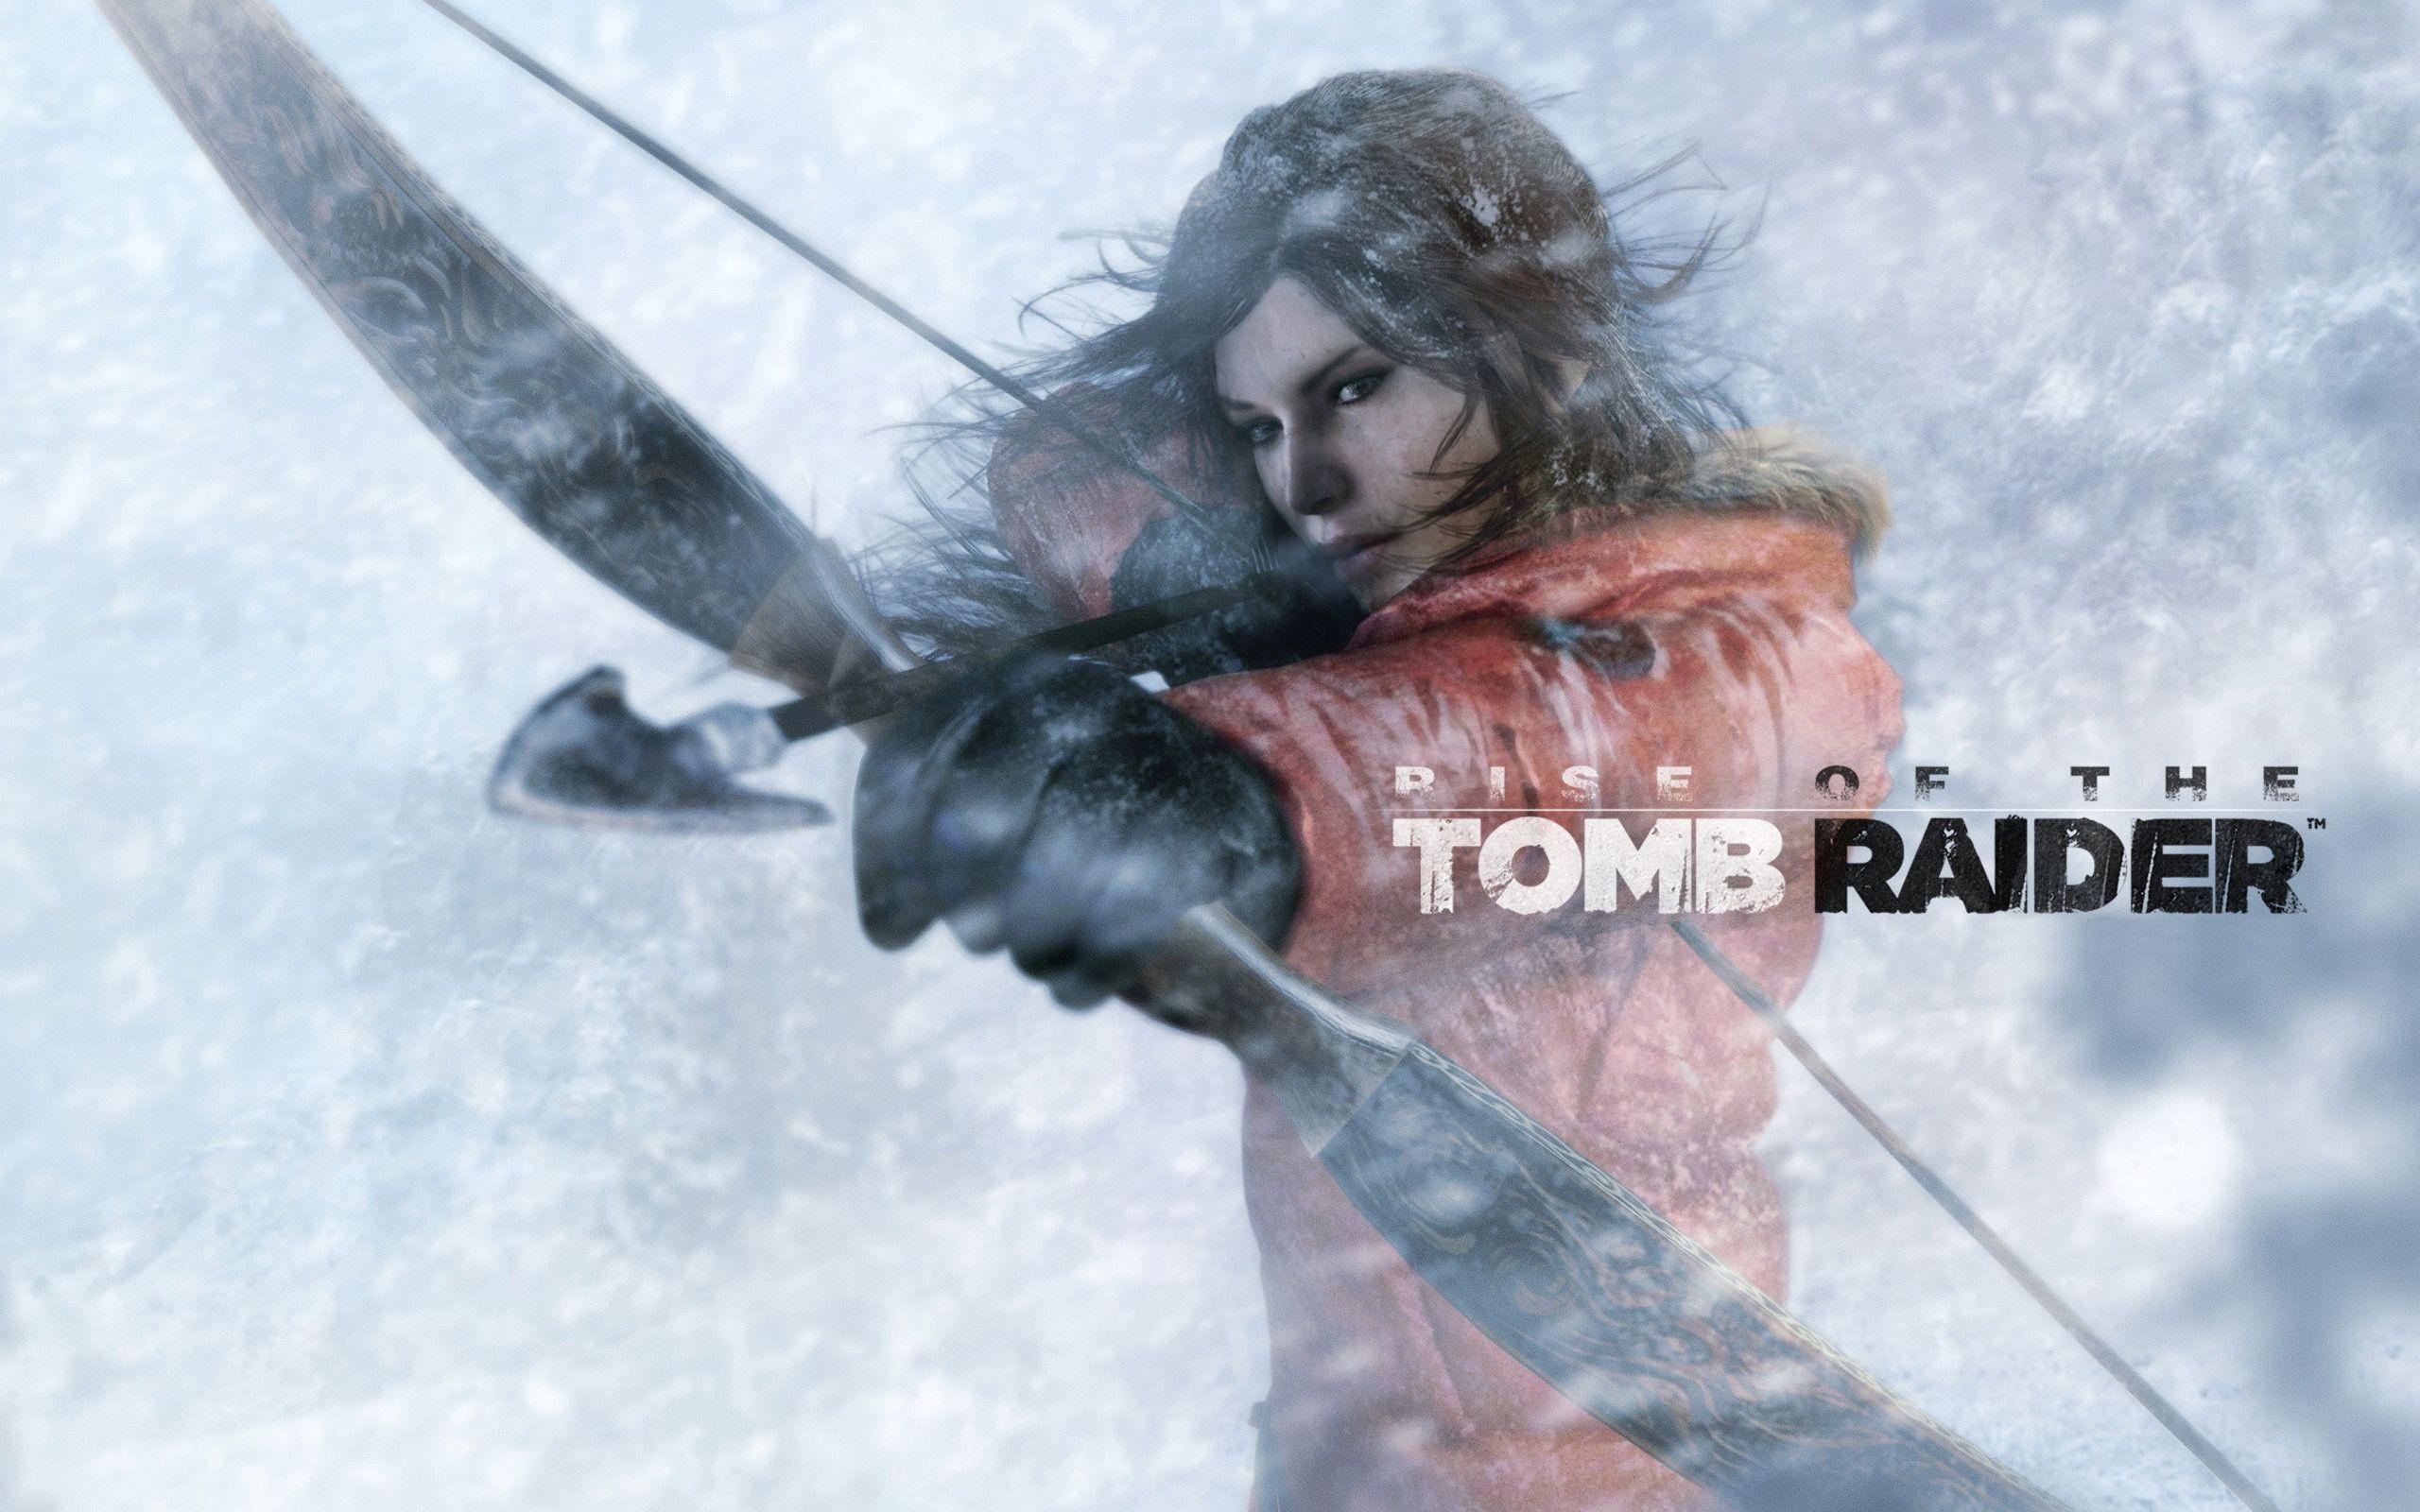 Rise of the Tomb Raider Launching On PS4 October 11 with Loads of